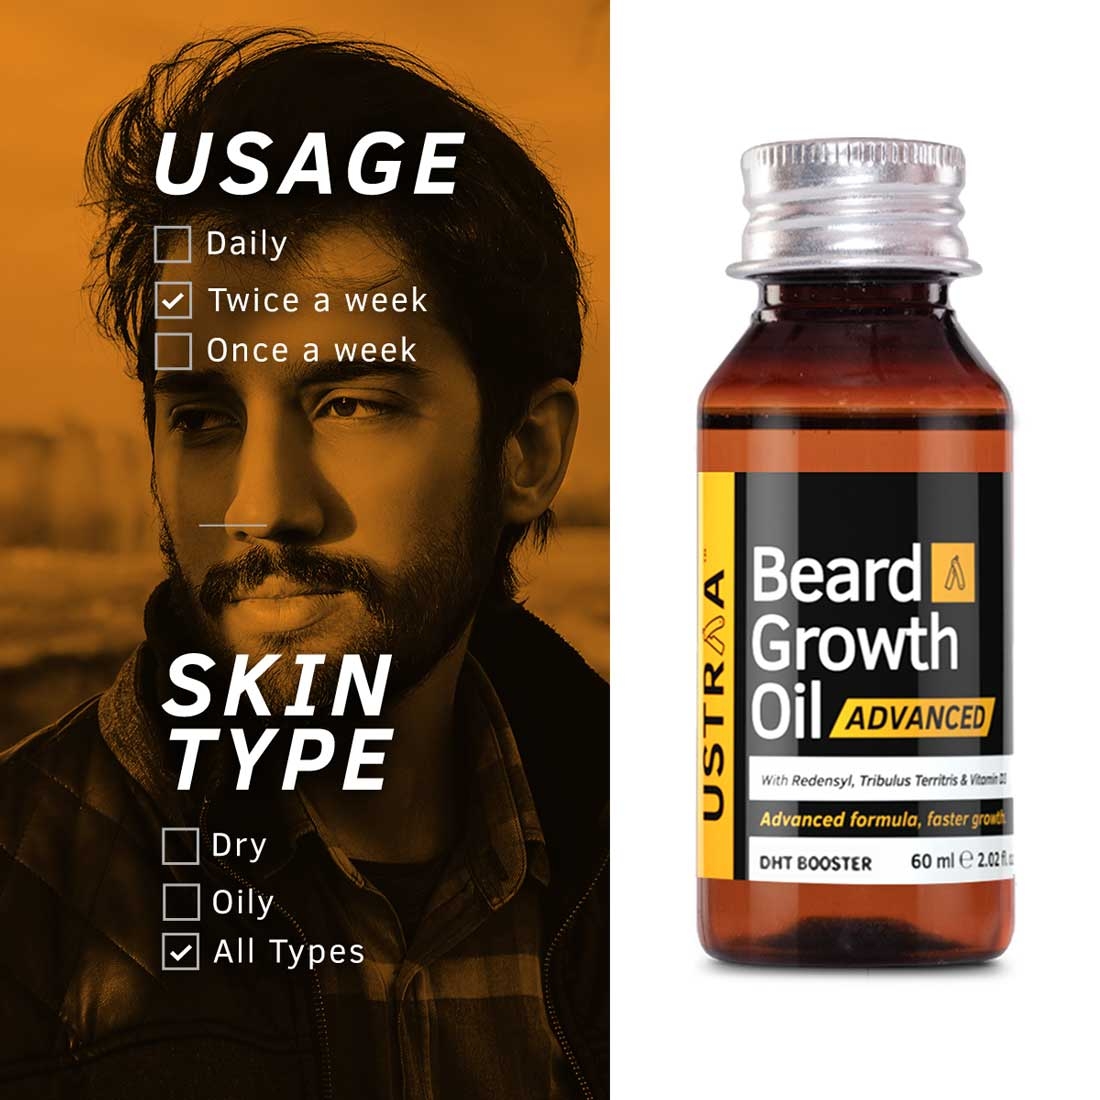 Ustraa | Beard growth Oil - Advanced (With Dht Boosters) - 60ml 4